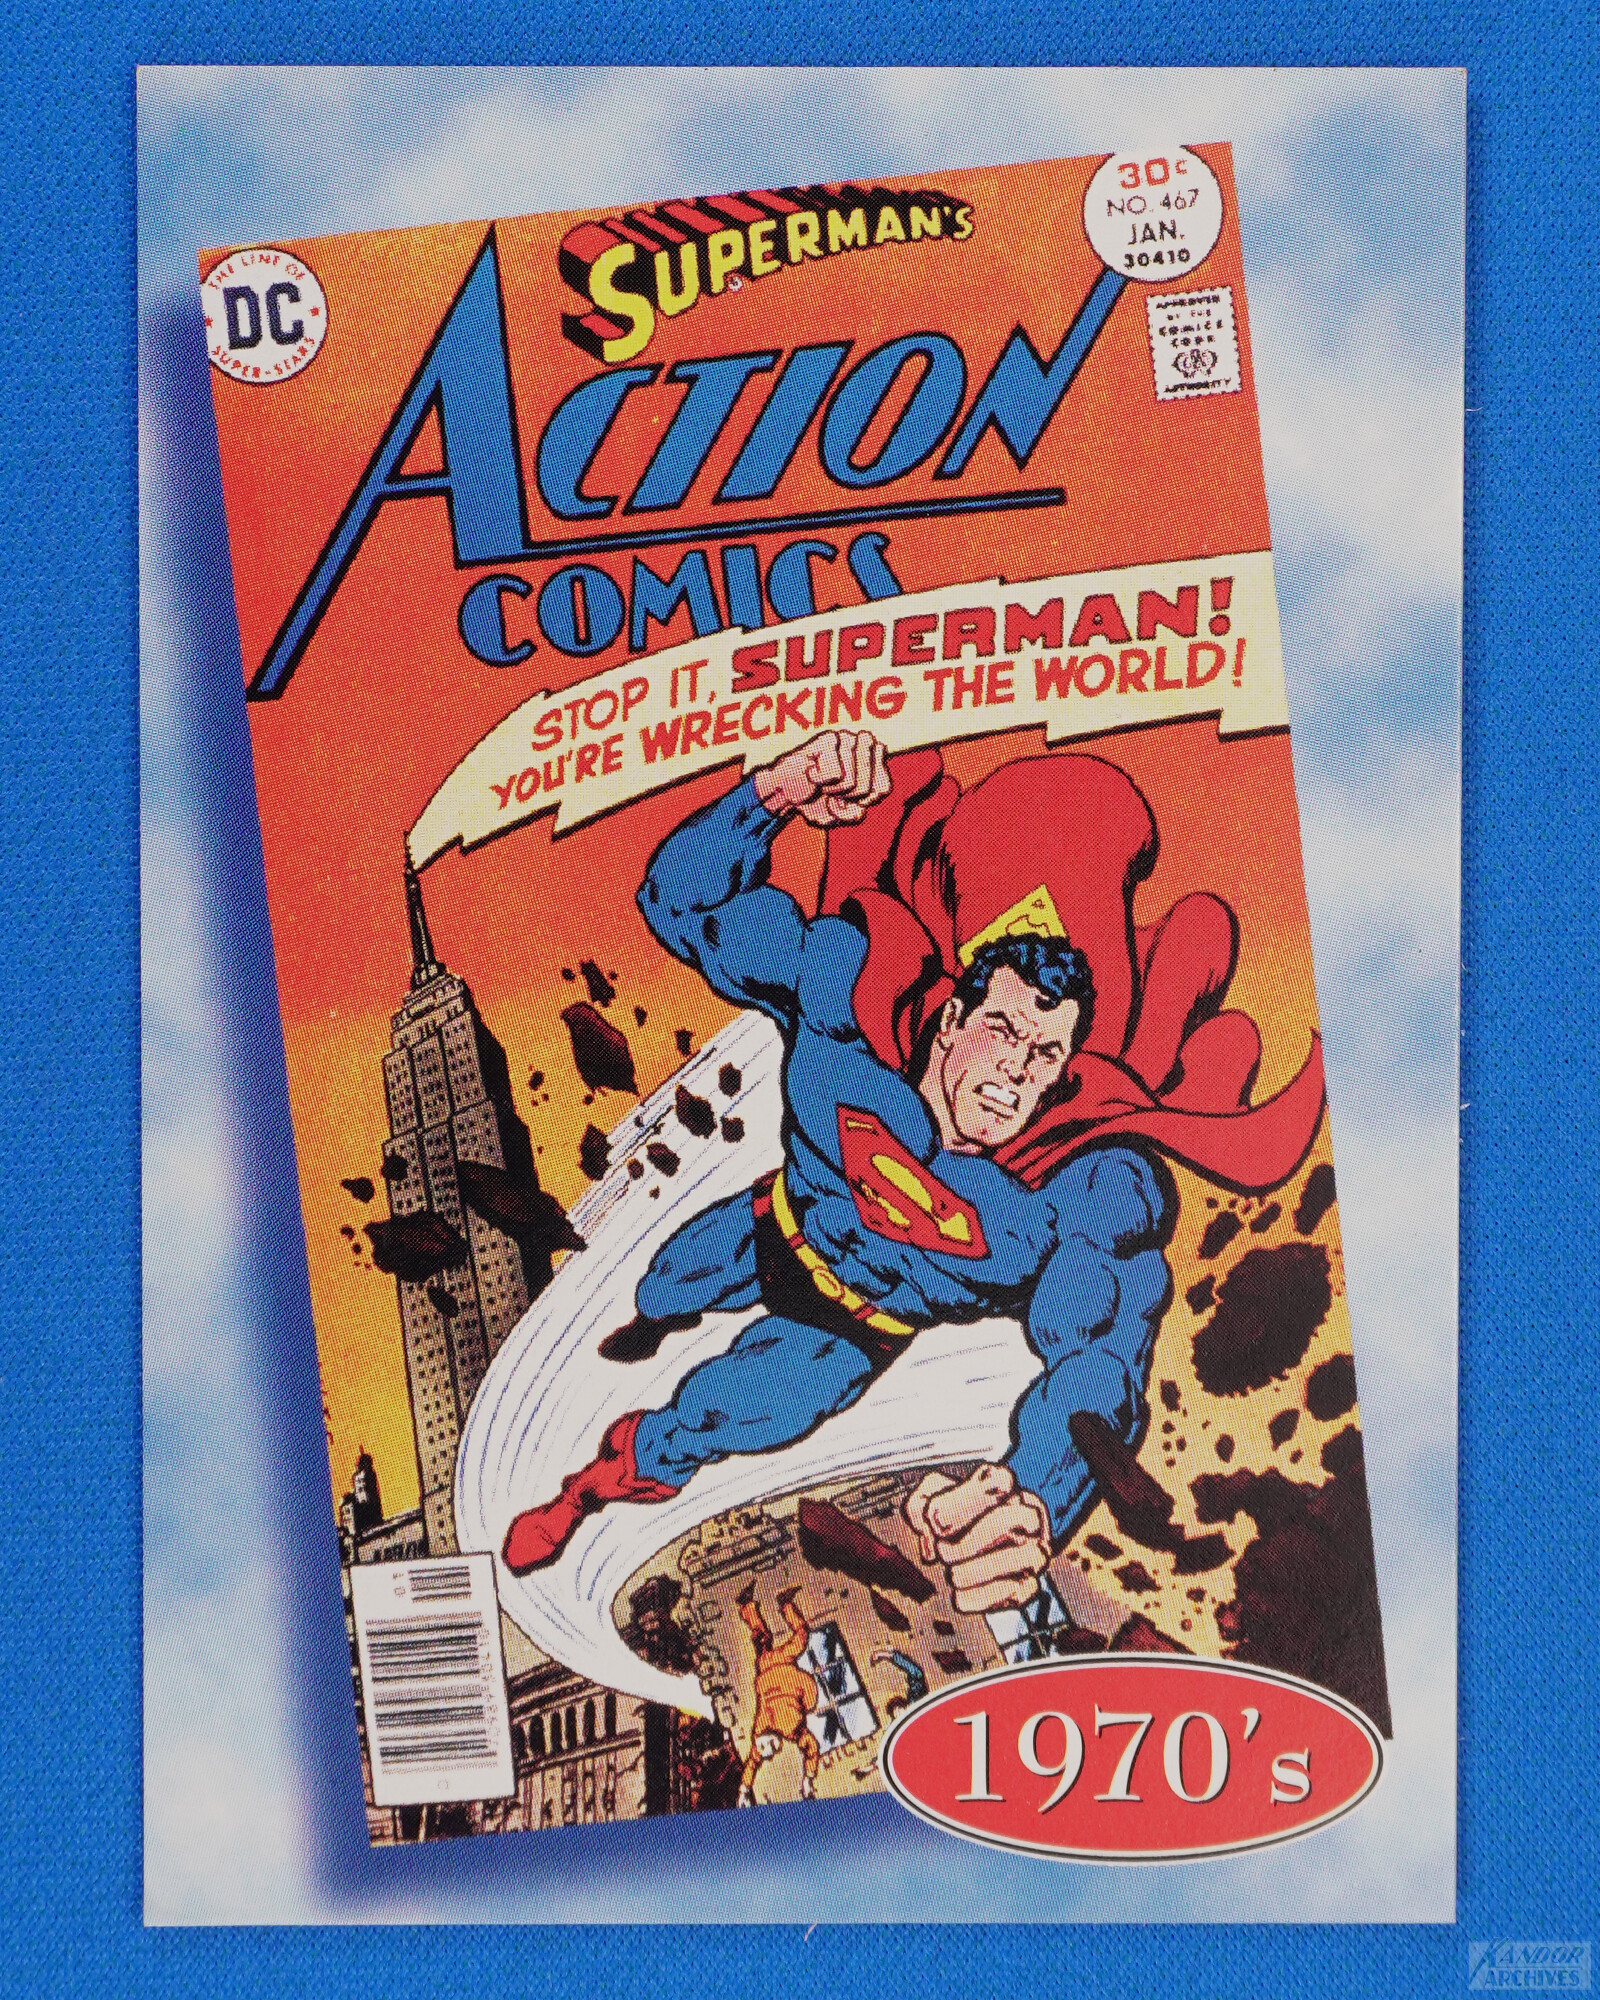 1996 SkyBox DC Kenner & FAO Schwarz: The History of Superman - S2 - Action Comics #467, January 1977